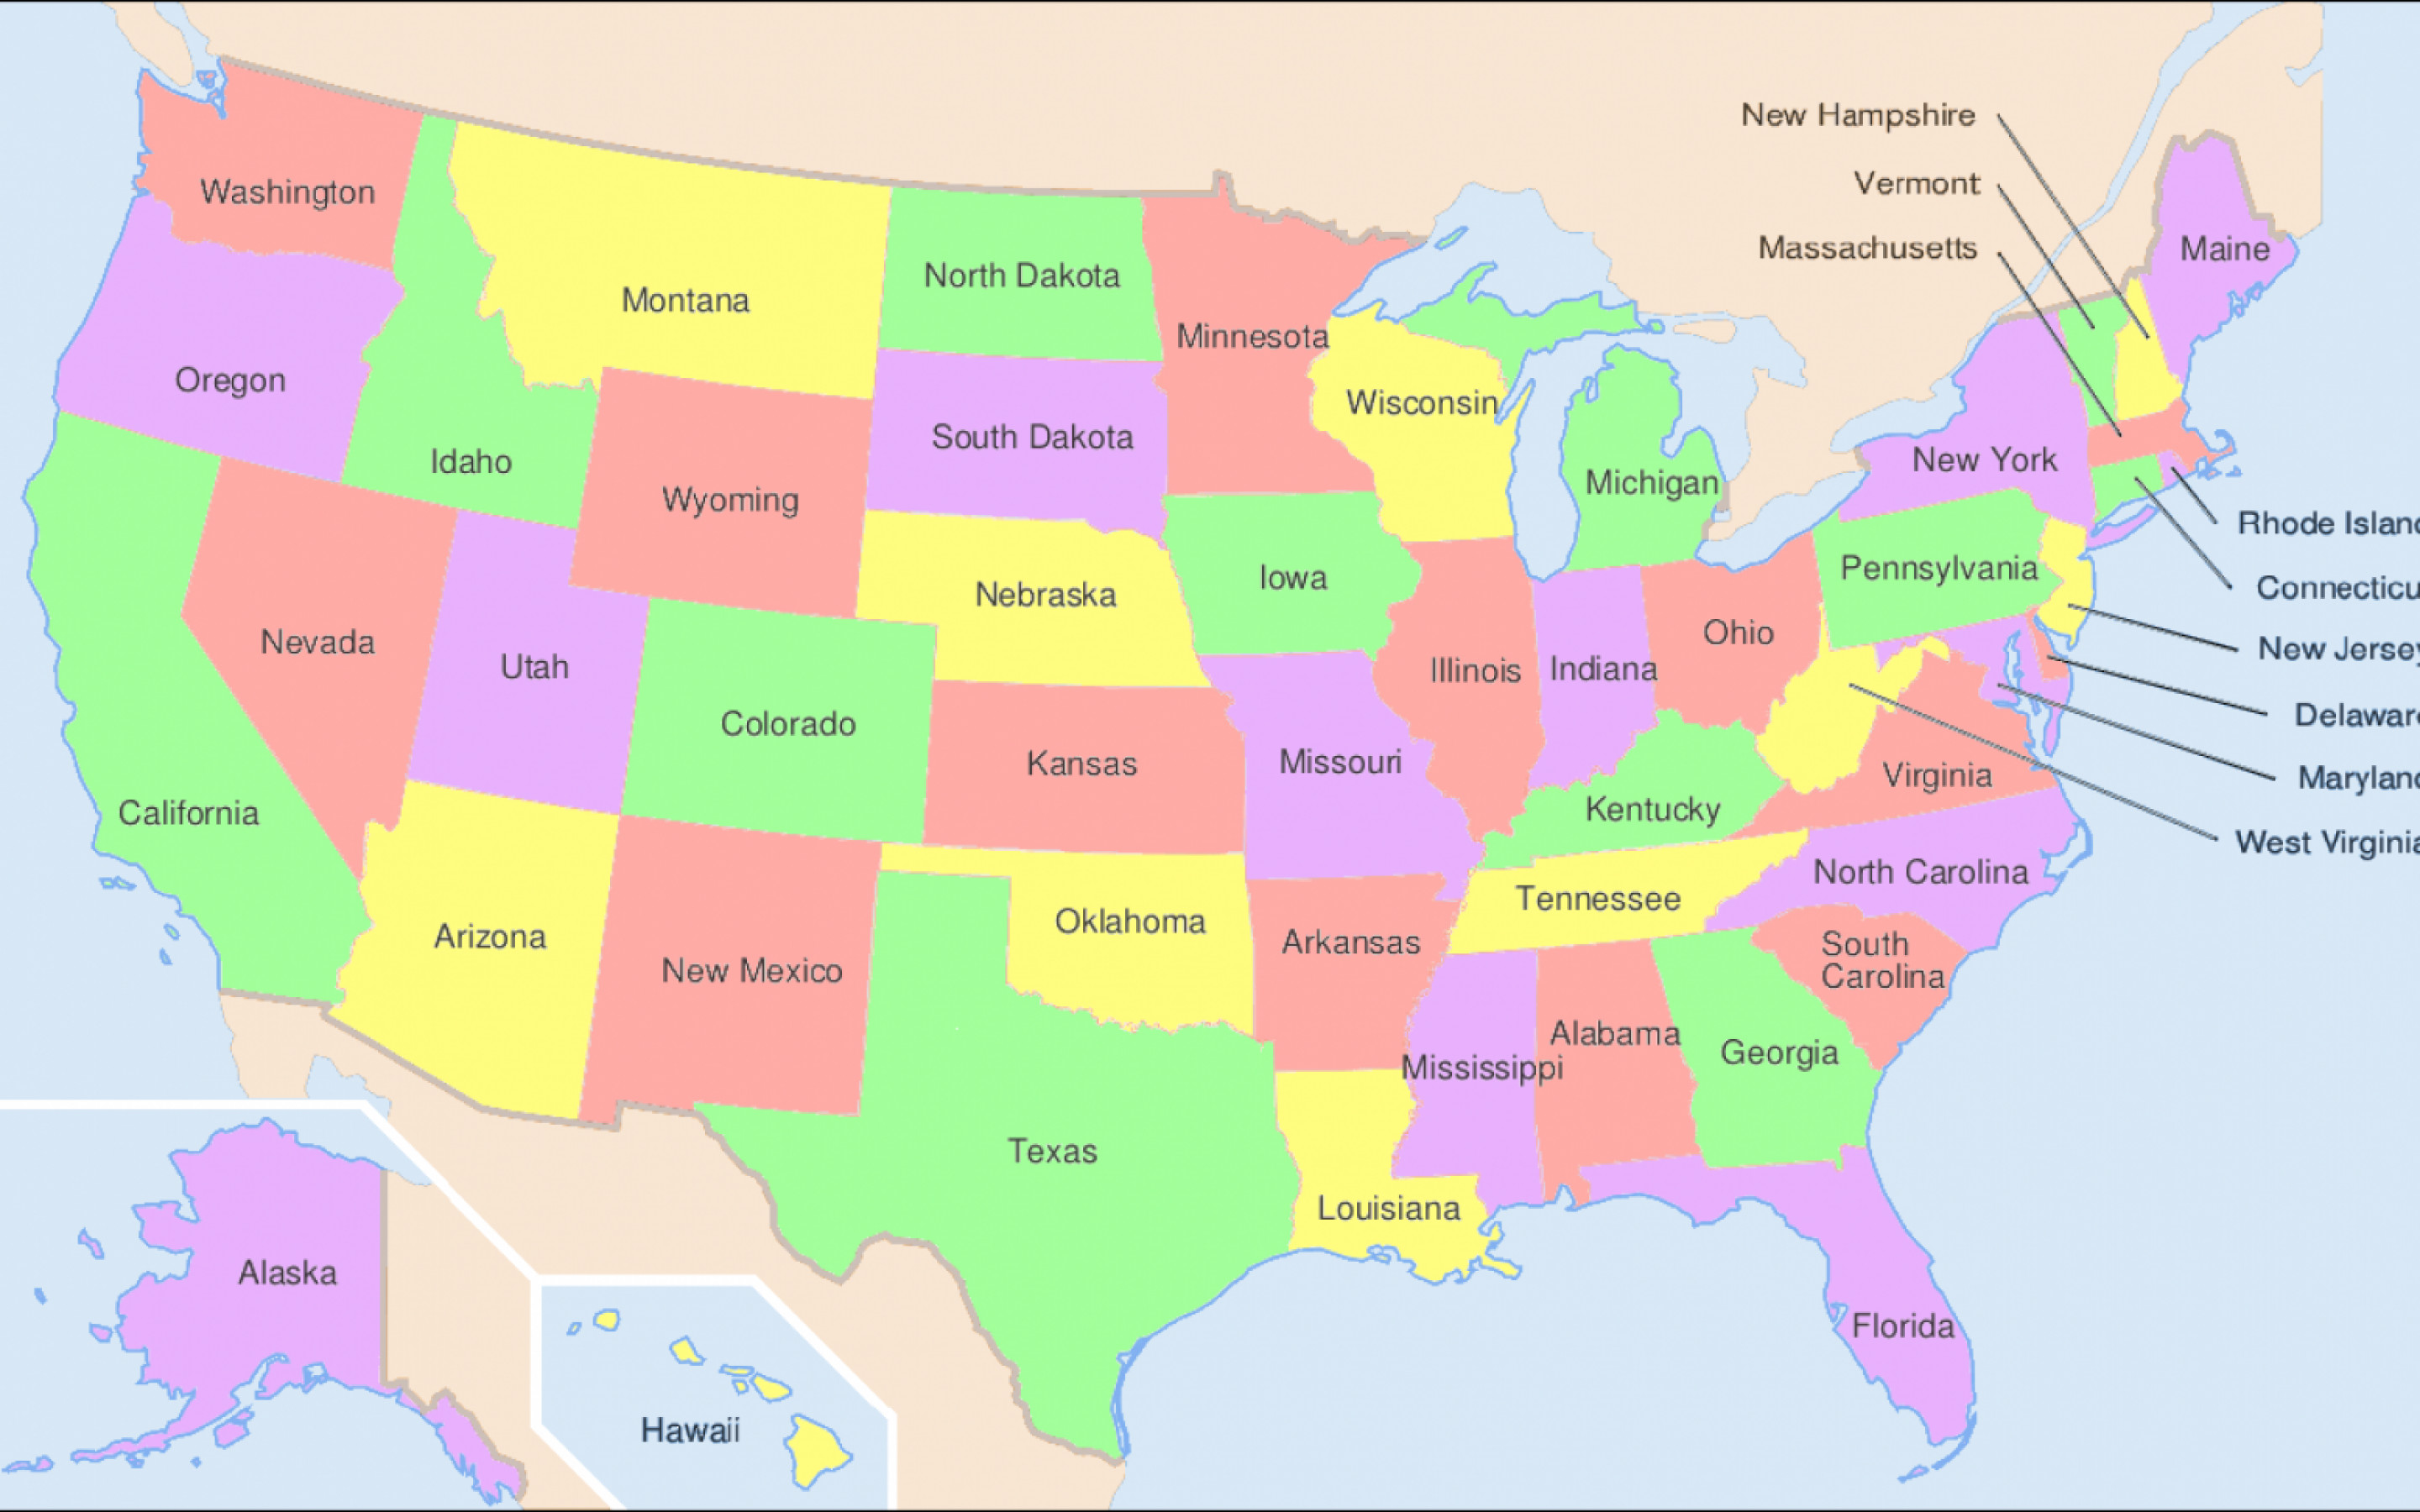 2880x1800 Usa Map United States Pictures 4129577 With Resolutions 2880Ã1800 .